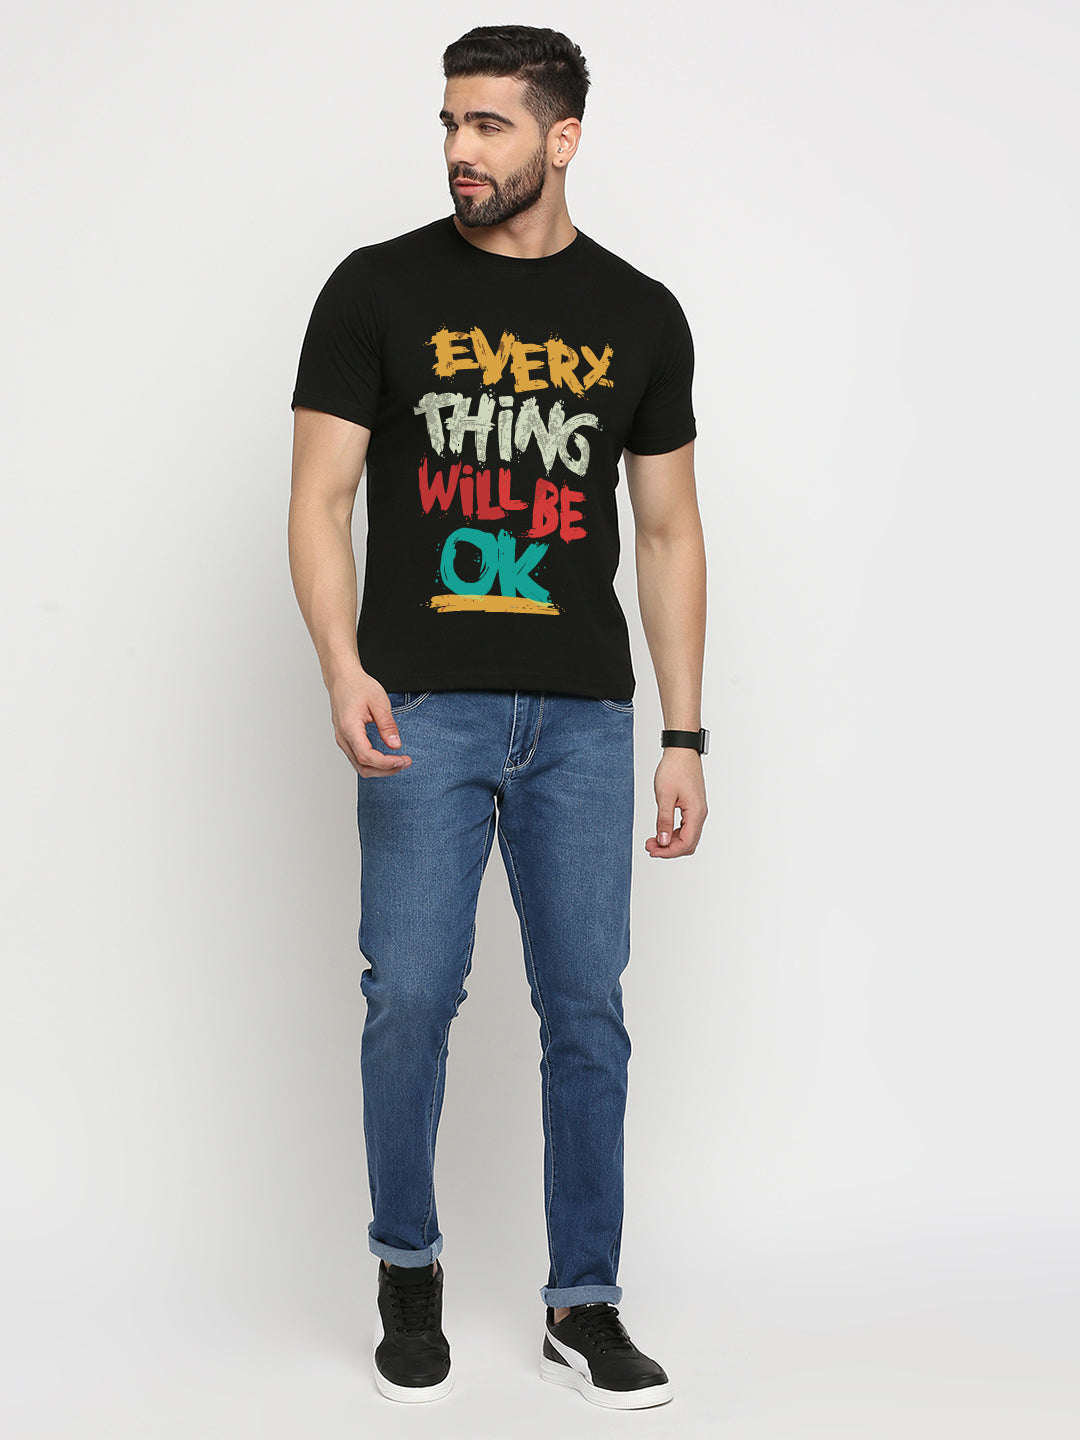 Everything Will Be Okay T-Shirt